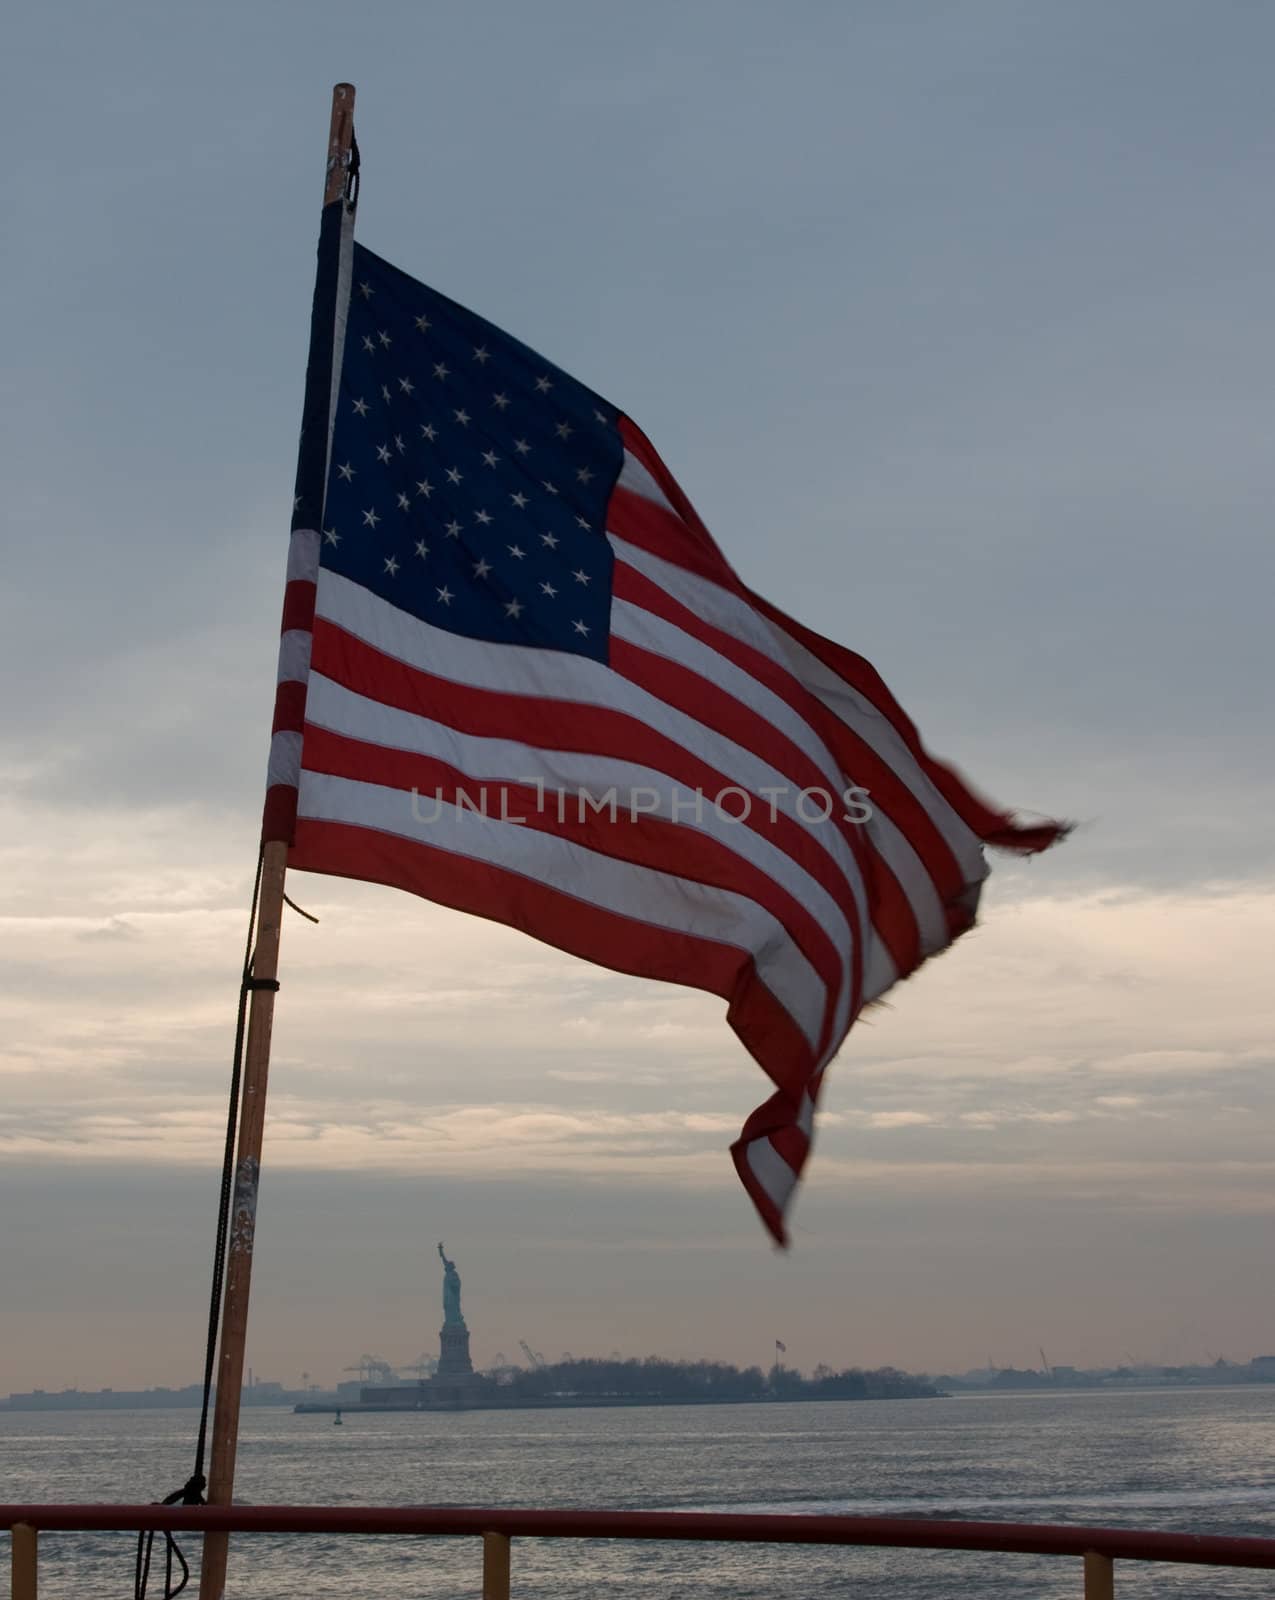 The United States flag wrapped around the Statue of Liberty in the distance, as seen from the Ferry.